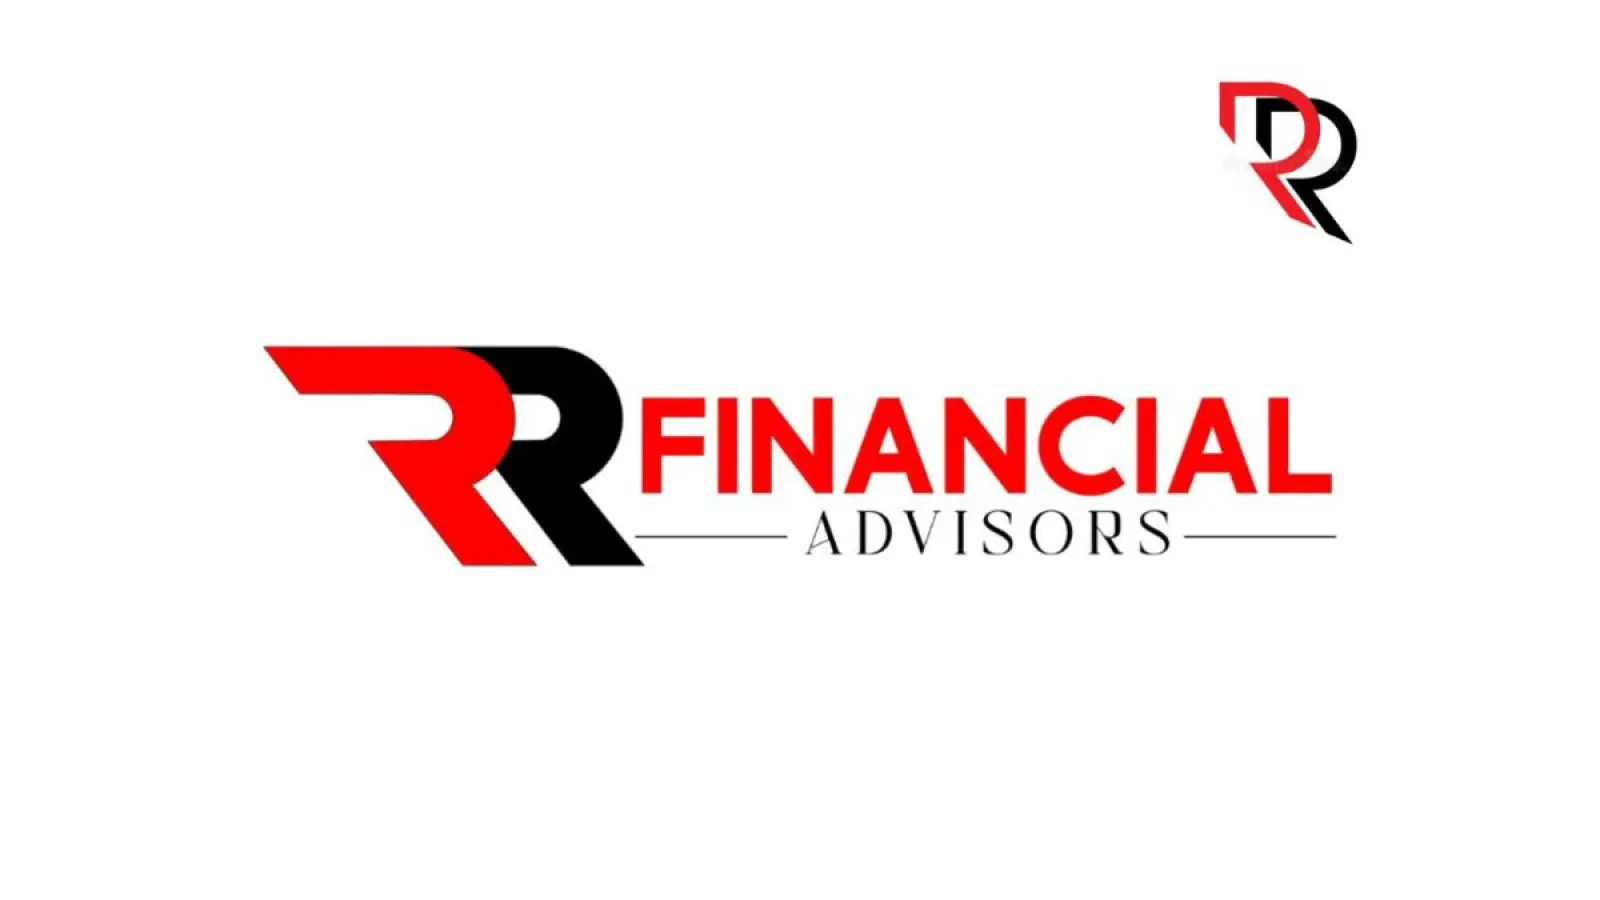 RR Financial Advisors: Elevating Financial Solutions to Unprecedented Heights